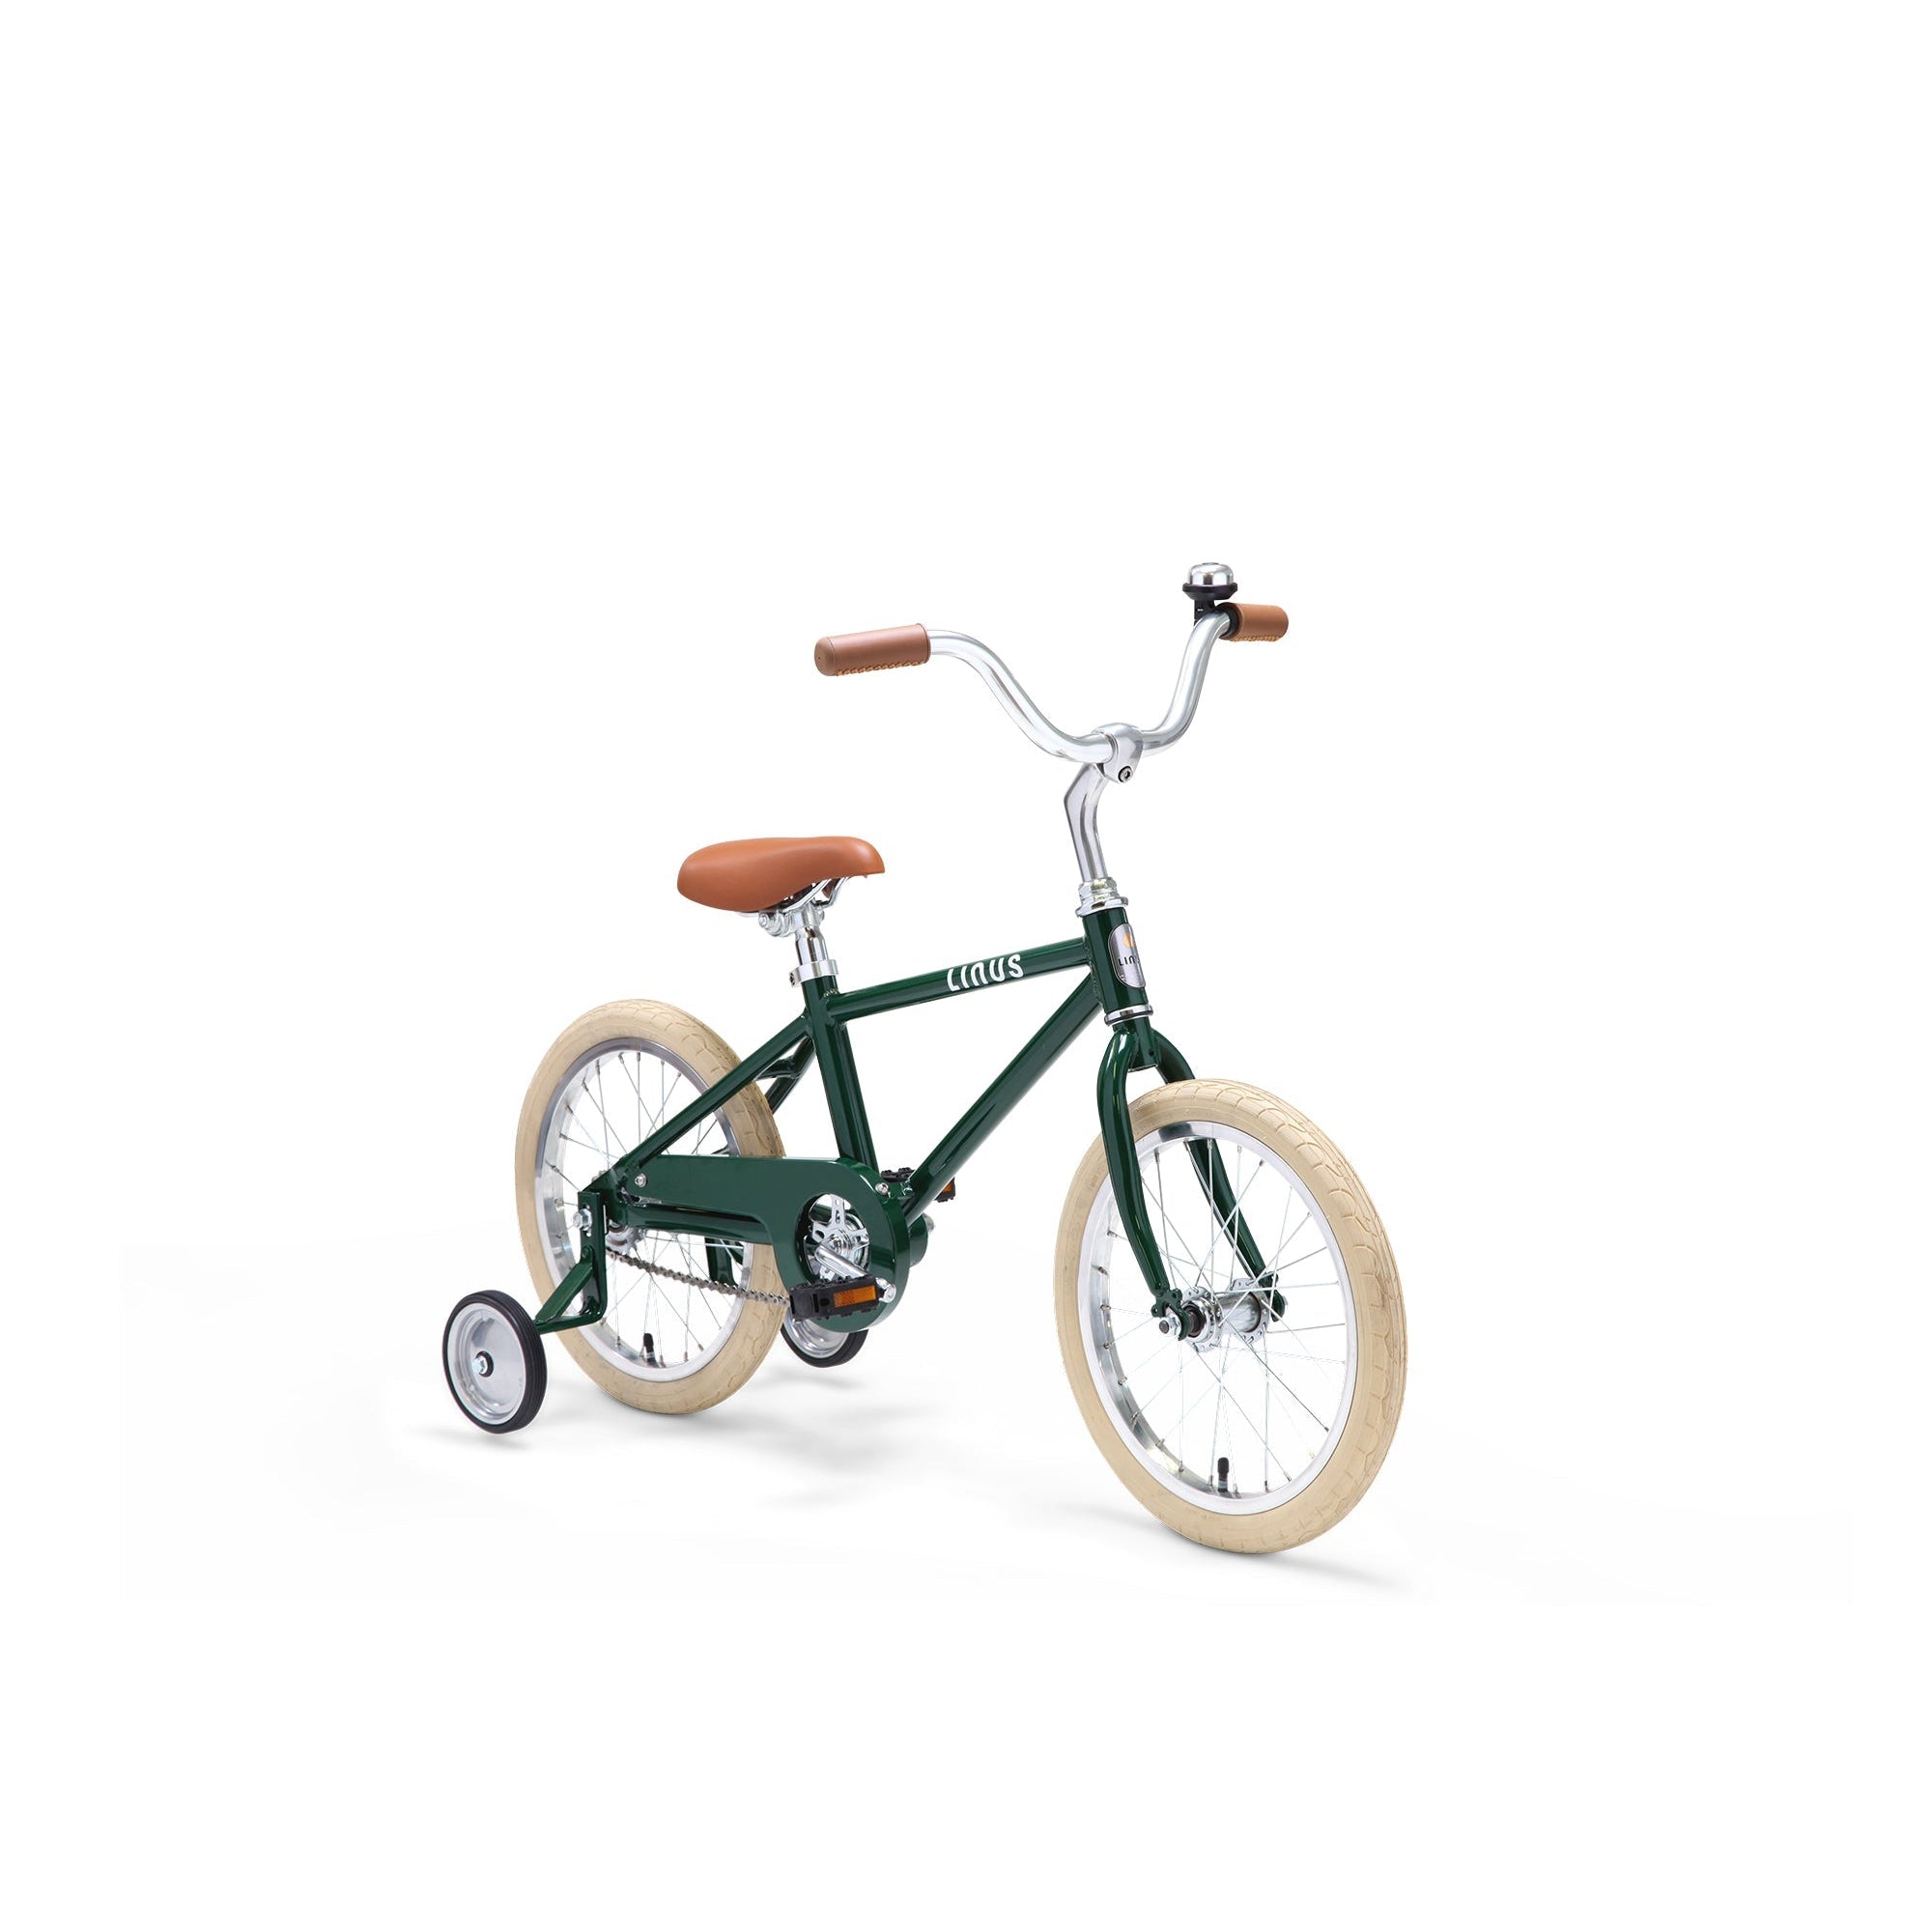 Linus Lil' Roadster 16" Bicycles